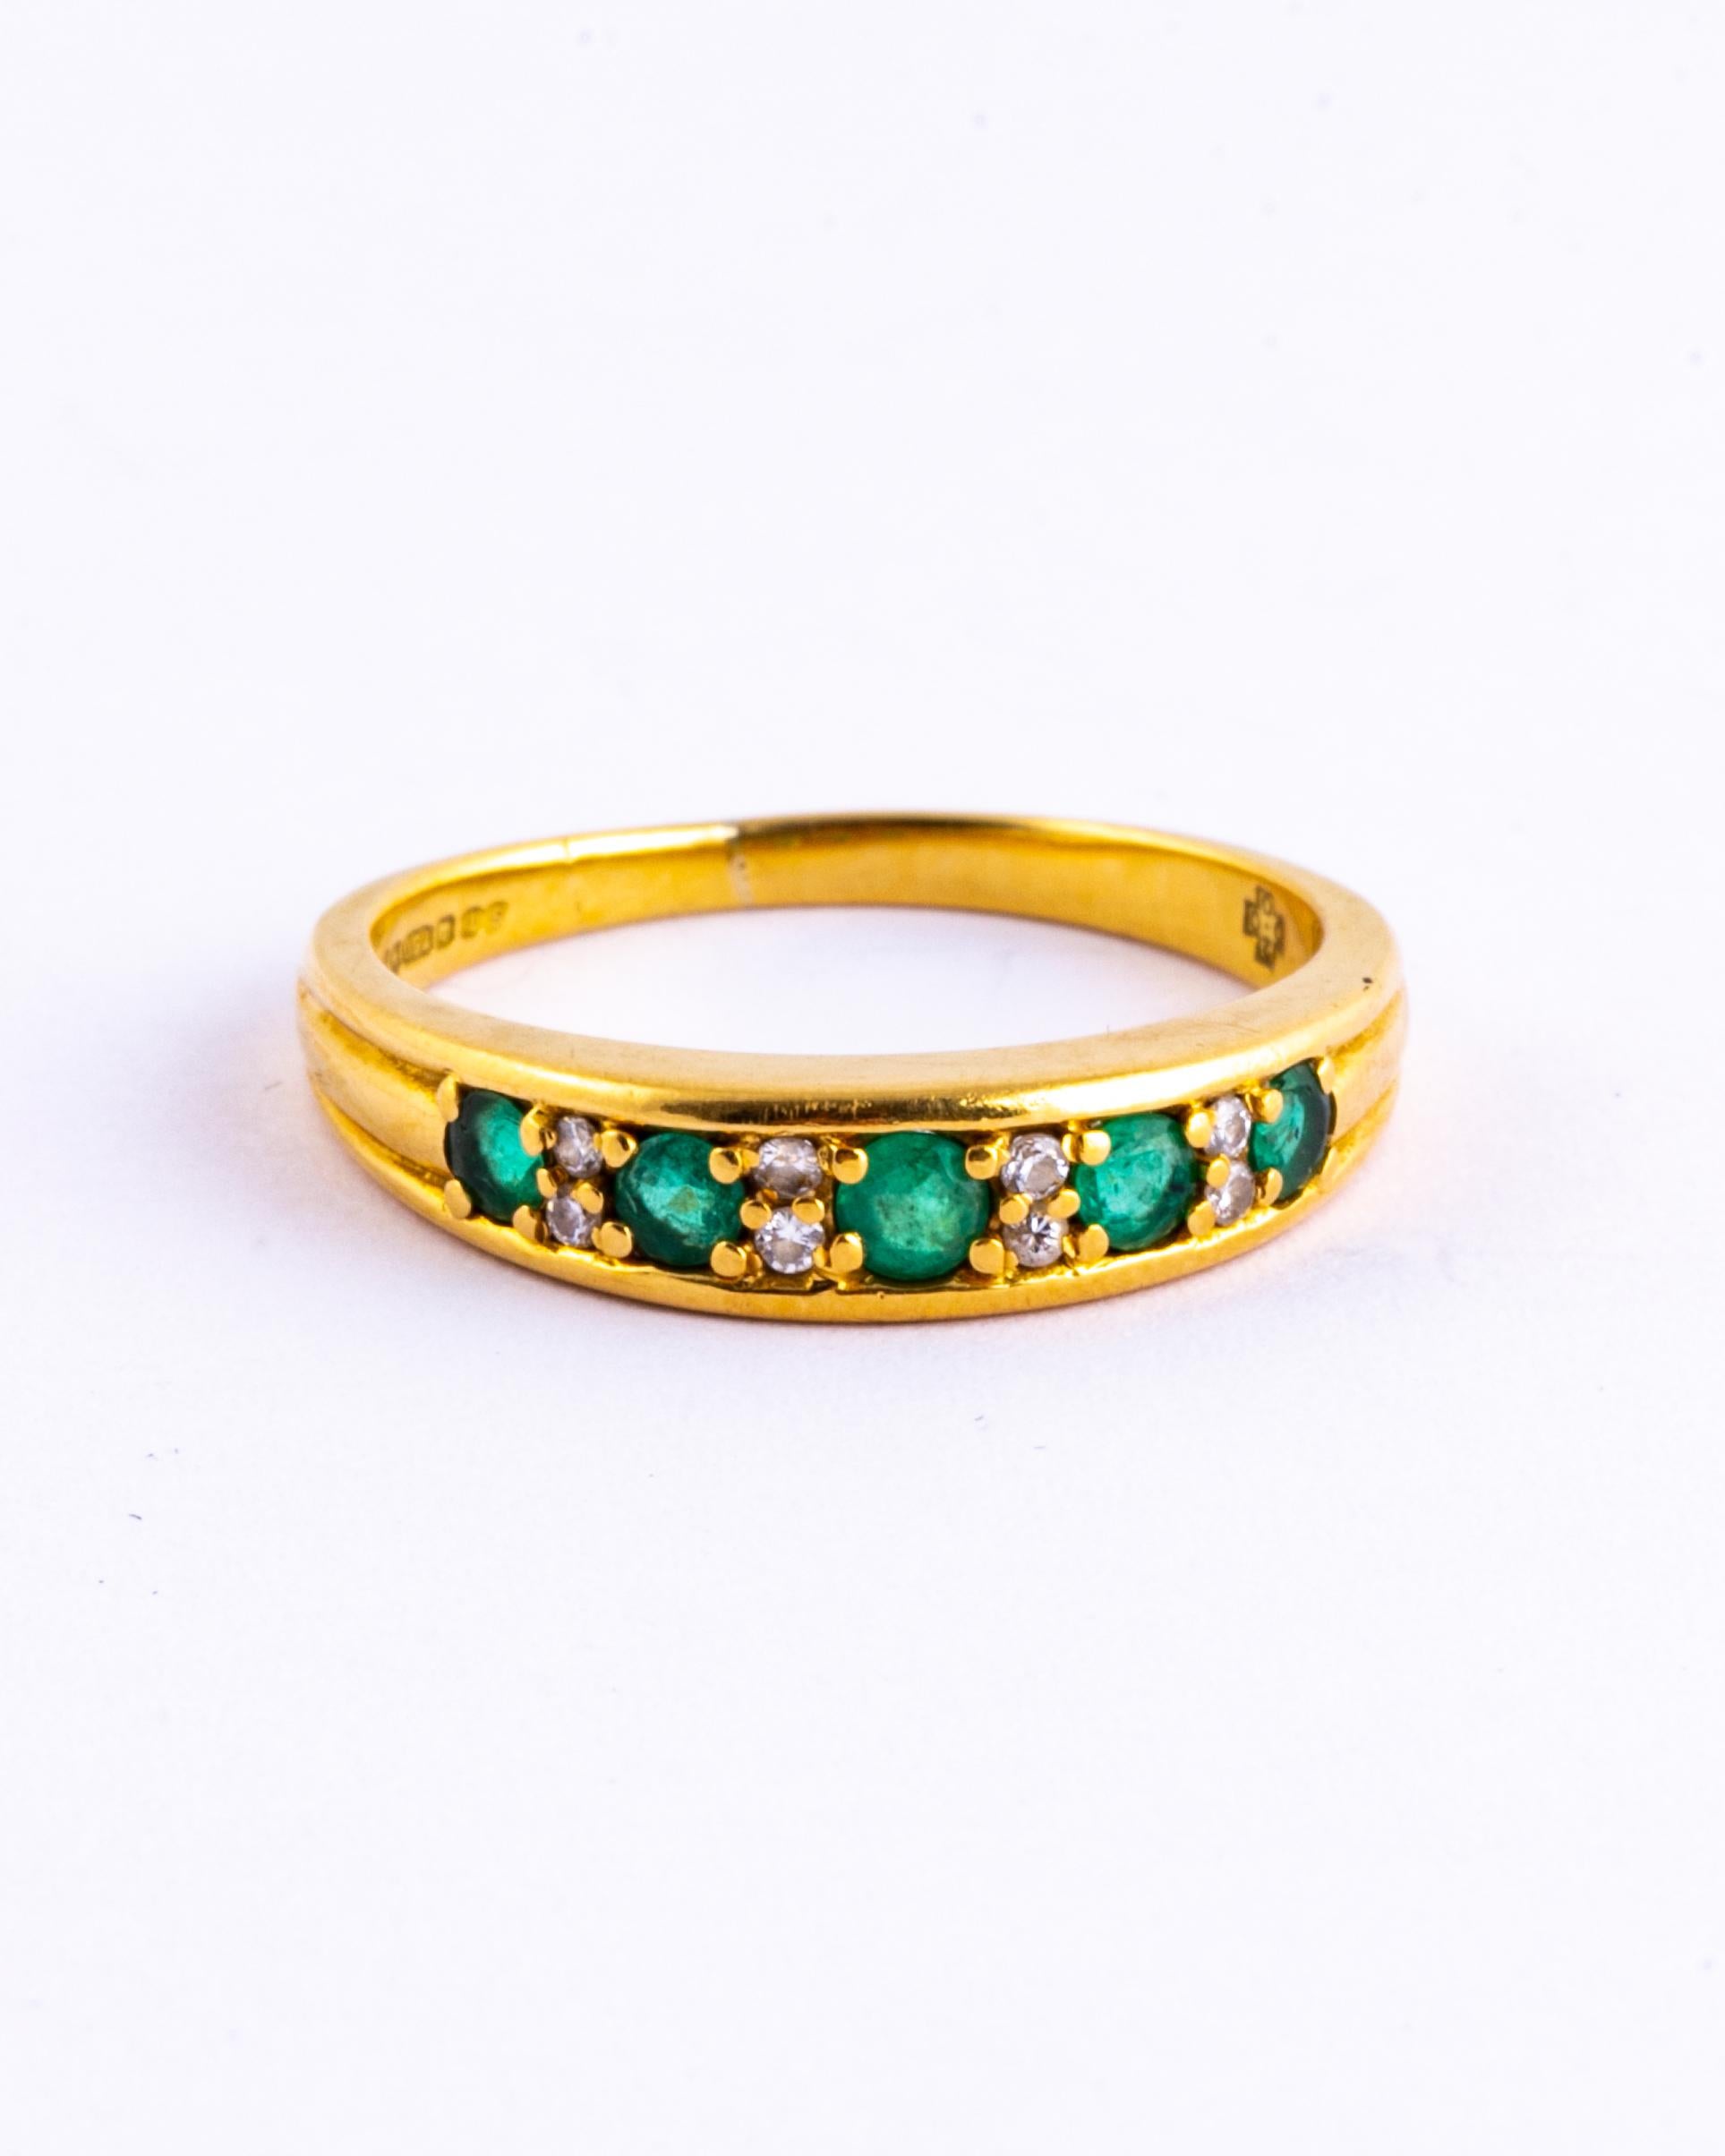 This classic gypsy style band is modelled in 18carat gold and the diamond which is set in the star setting measures 10pts. Made in Chester England. 

Size: O 1/2 or 7 1/2 
Width: 8mm

Weight: 2.4g
